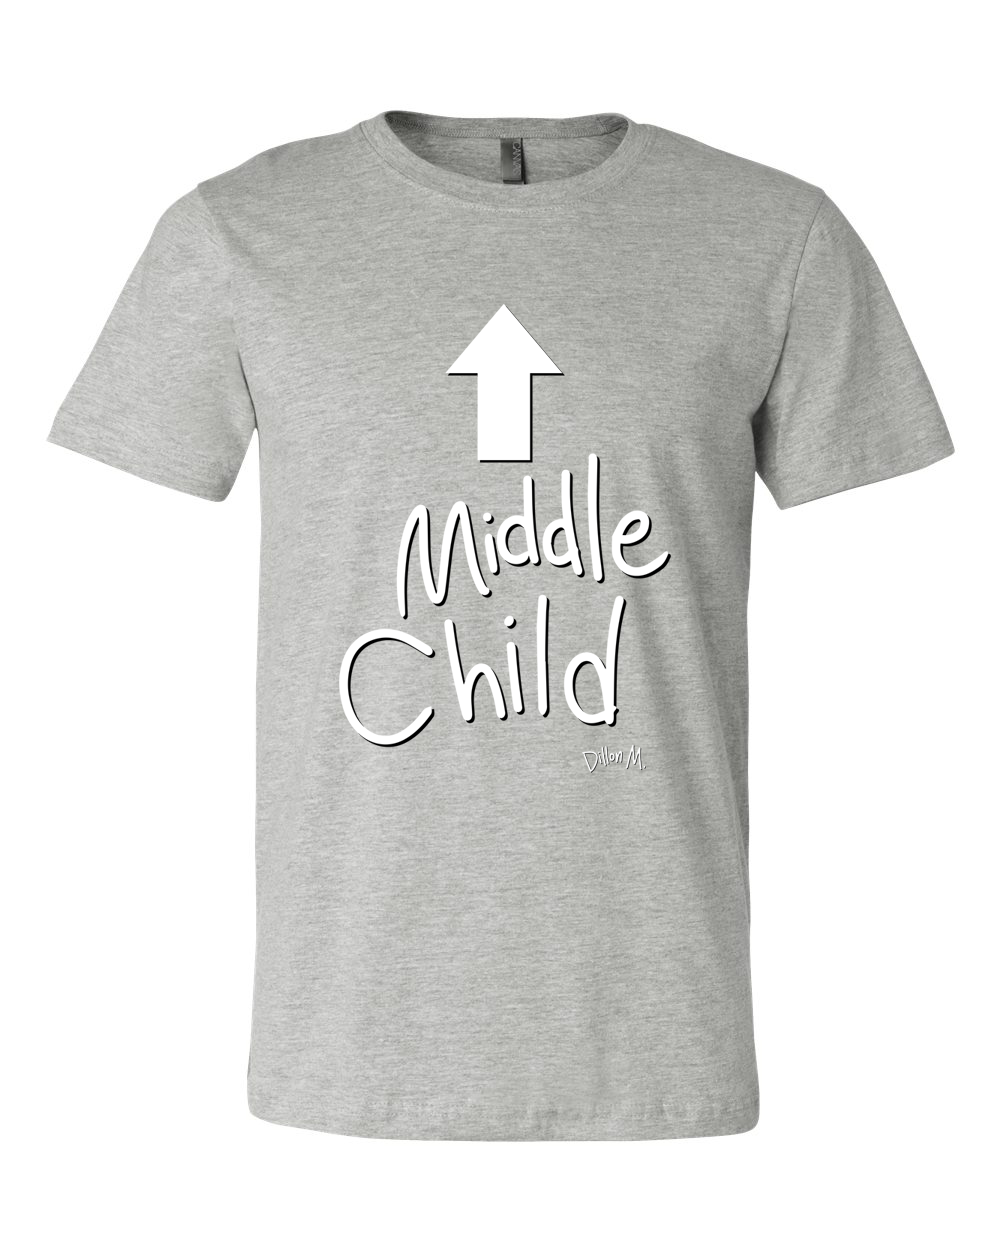 Dillon M. : Middle Child Tee